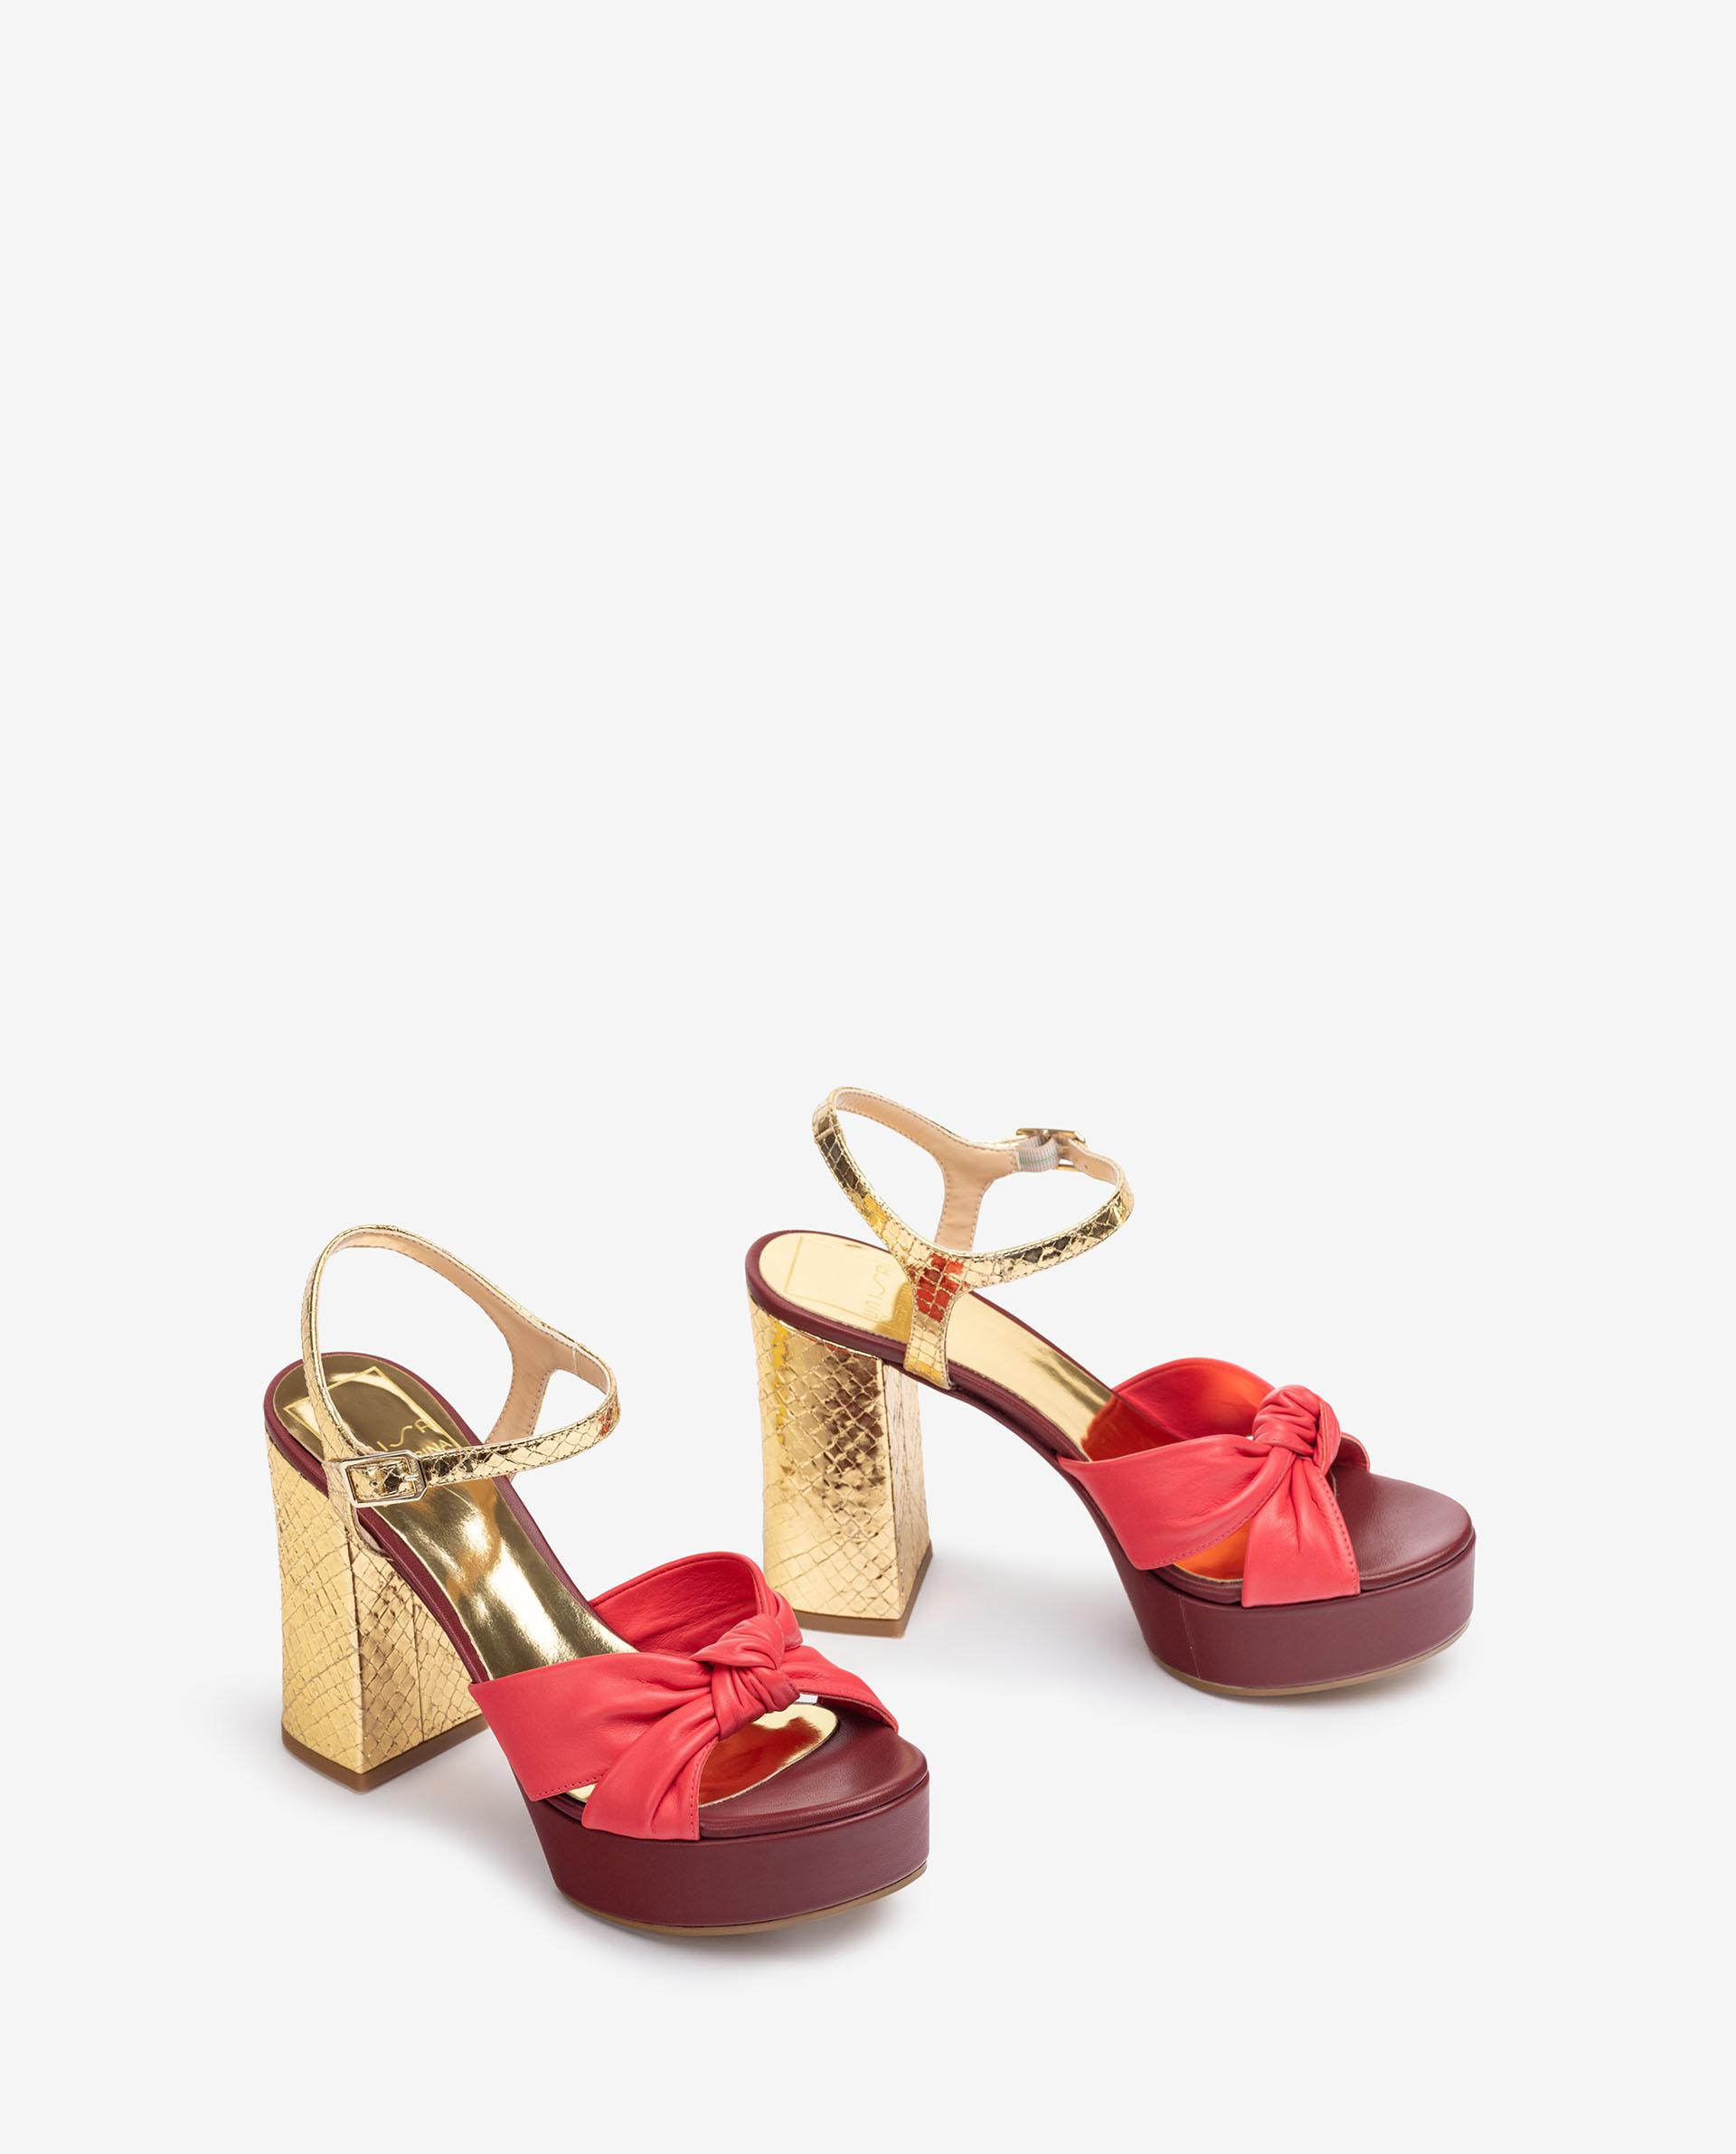 Unisa Unisa by Cherubina | Heeled Sandals and Party Shoes VIVIEN_NS_MTB coral/gold